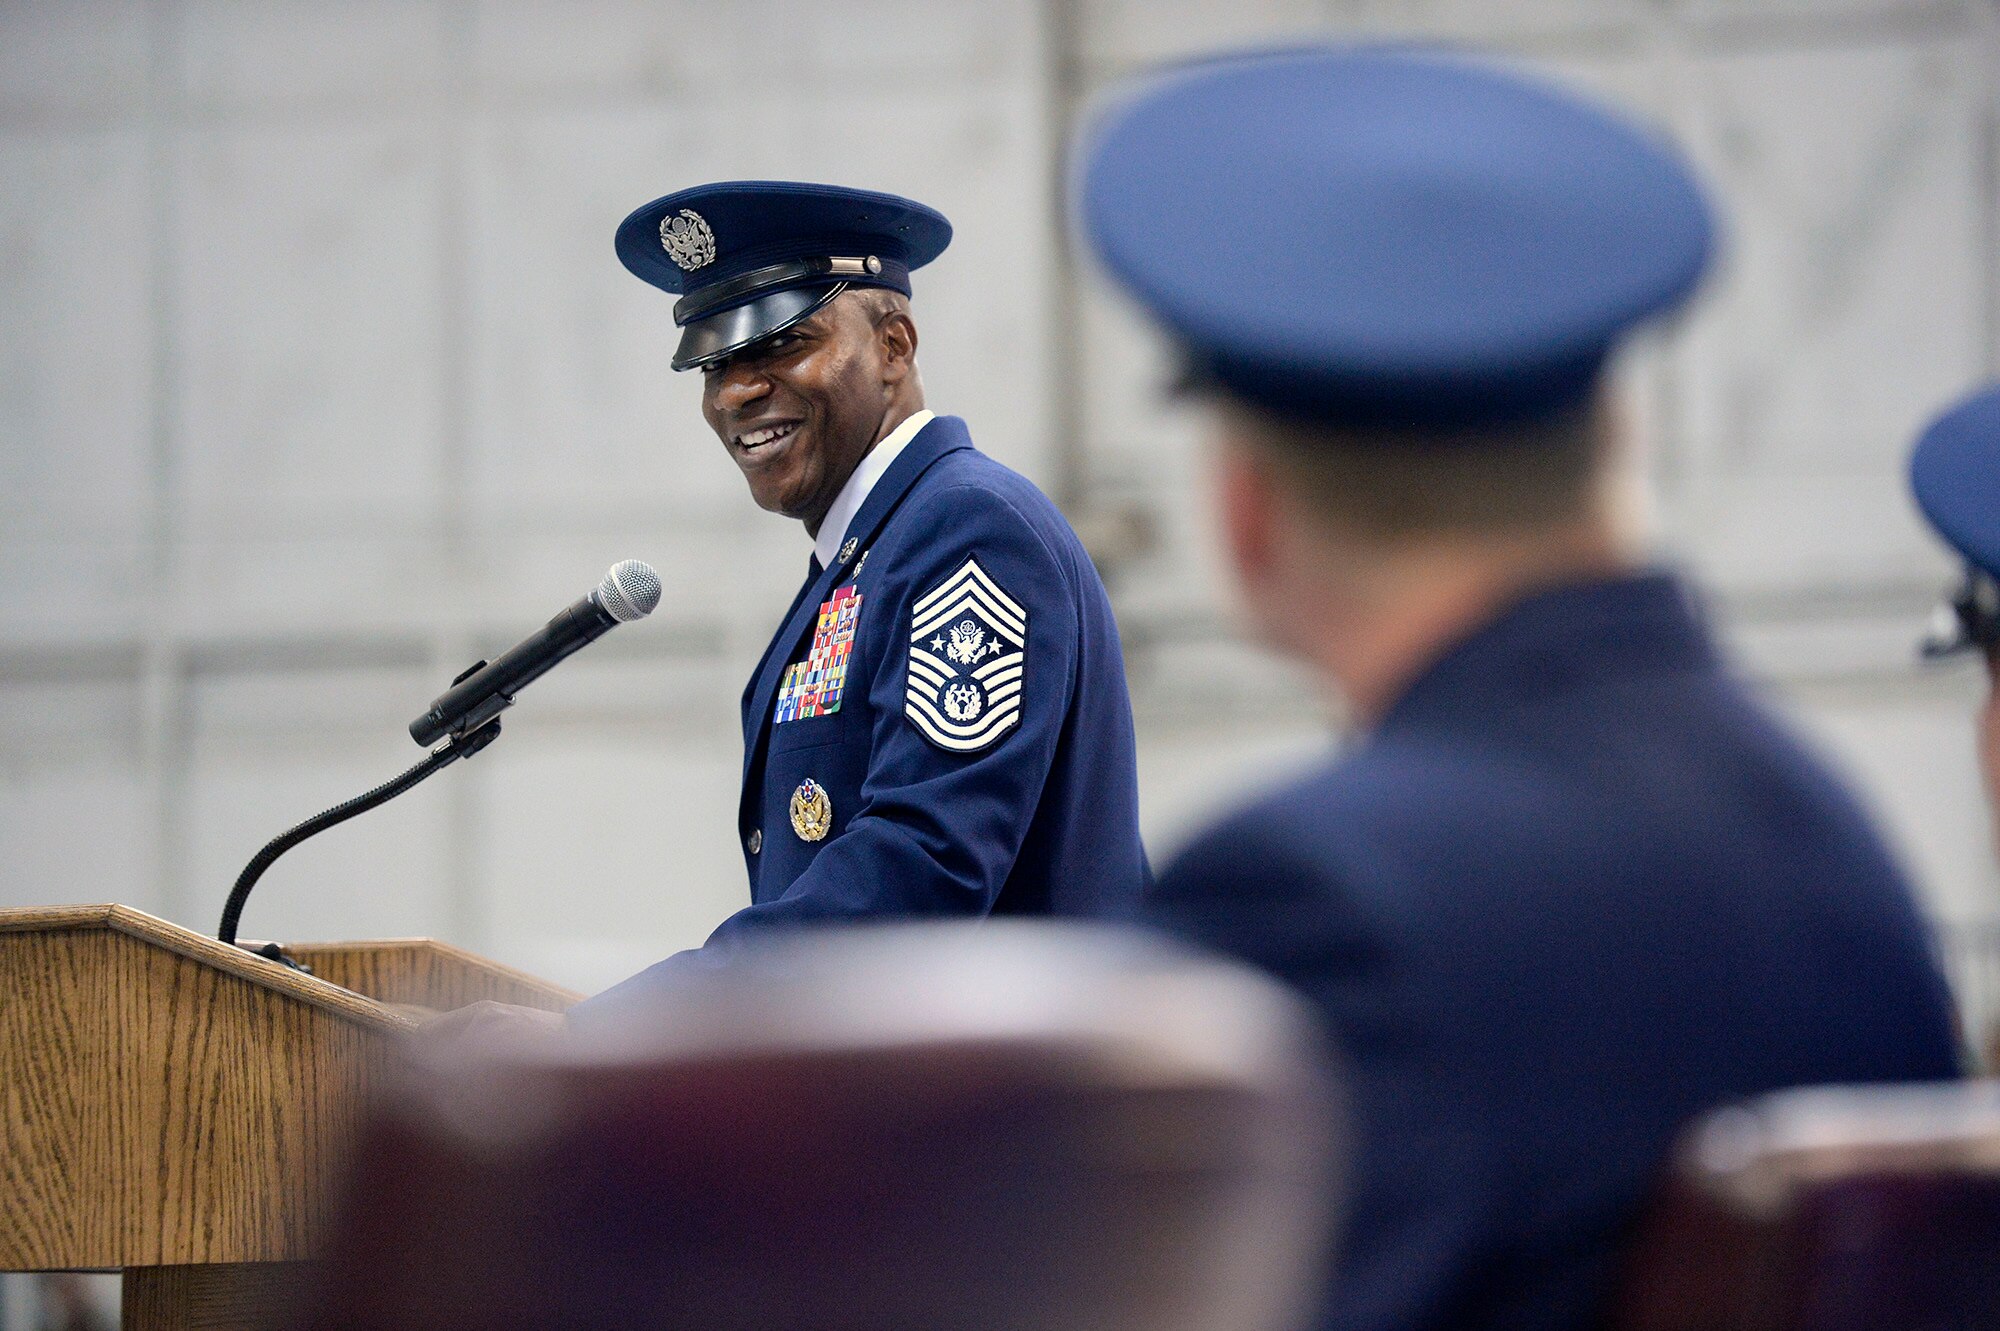 Chief Master Sgt. of the Air Force Kaleth O. Wright thanks former Chief Master Sgt. of the Air Force James A. Cody during their retirement and appointment ceremony on Joint Base Andrews, Md., Feb. 17, 2017. Cody retired after 32 years of service and was succeeded by Wright, the 18th Airman to hold the position. (U.S. Air Force photo/Andy Morataya)